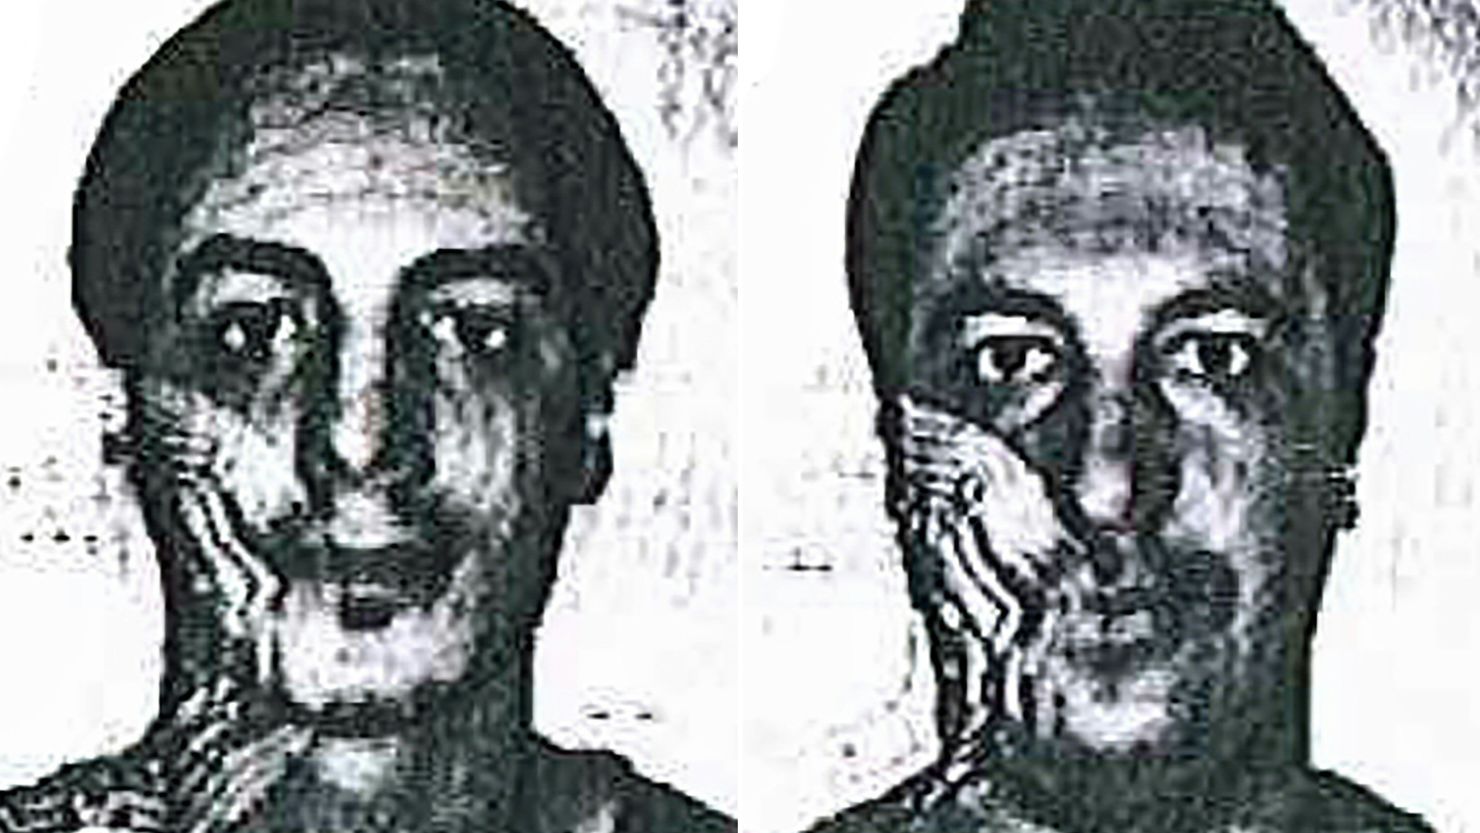 Belgian authorities on Friday said they are looking for two unidentified men -- using the false names of Soufiane Kayal, left, and Samir Bouzid -- in connection with the investigation into the November 13 terrorist attacks in Paris. Authorities say they believe the two were at the Austria-Hungary border with suspected ringleader Salah Abdeslam in September, weeks before the killings.